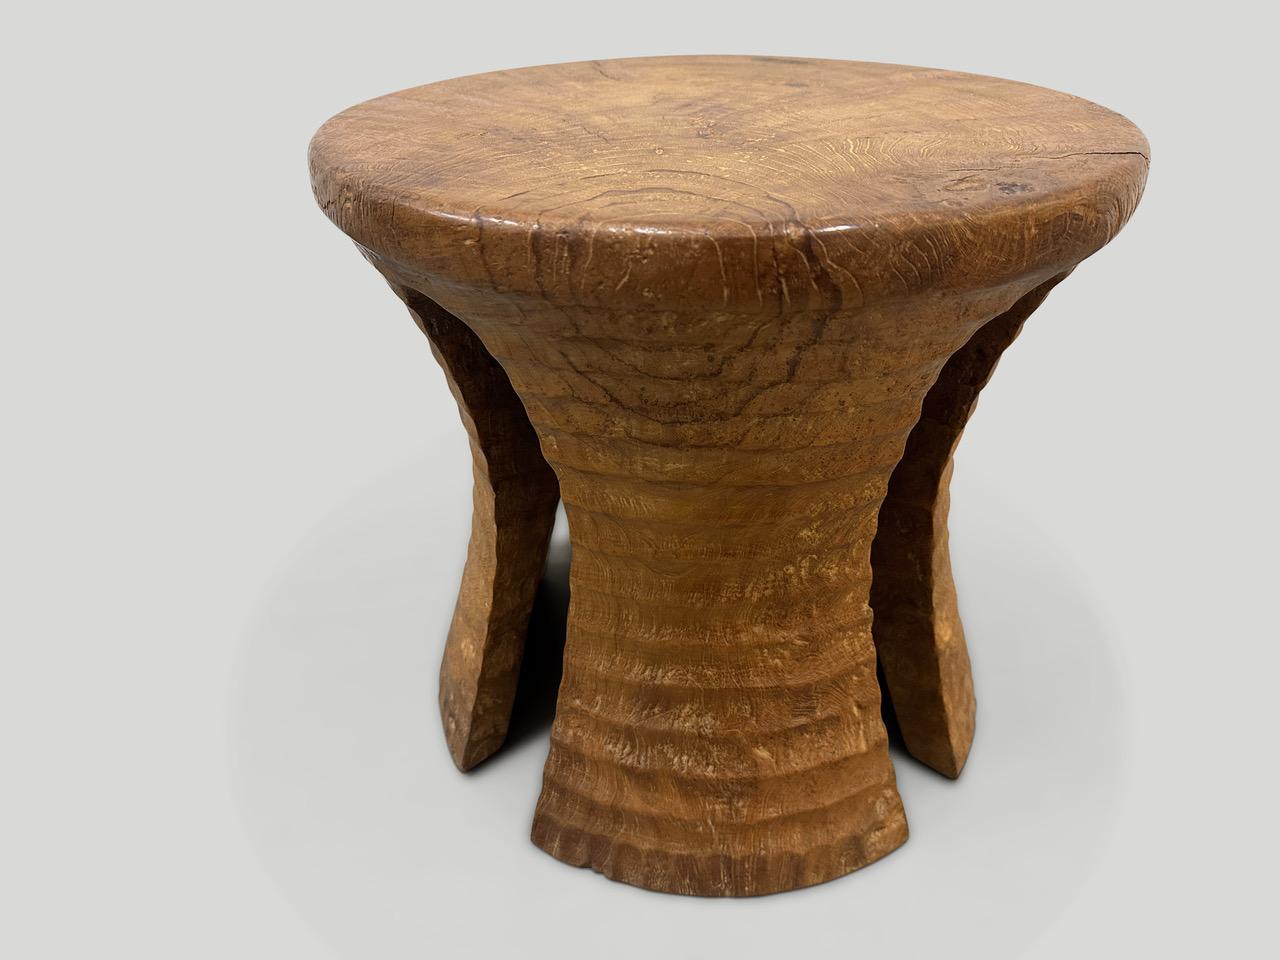 A century old teak wood mortar originally used to grind rice, is repurposed into this minimalist side table or stool. Part of the Mid Century Couture Collection, featuring our unique minimalist carving. We first turned this ancient piece upside down